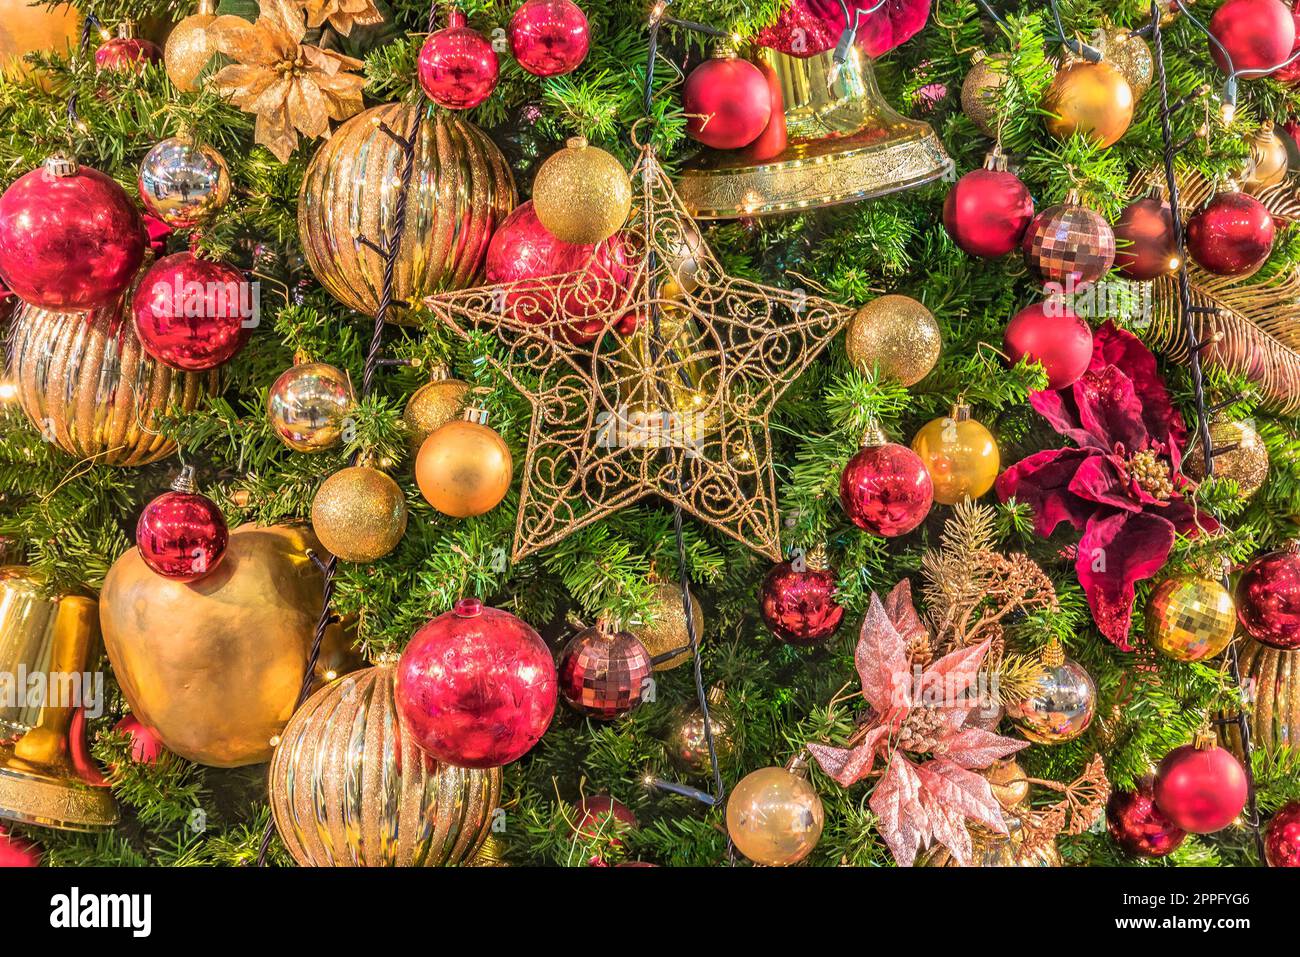 Background of Christmas tree ornament lights with glitter decoration balls in foreground. Stock Photo